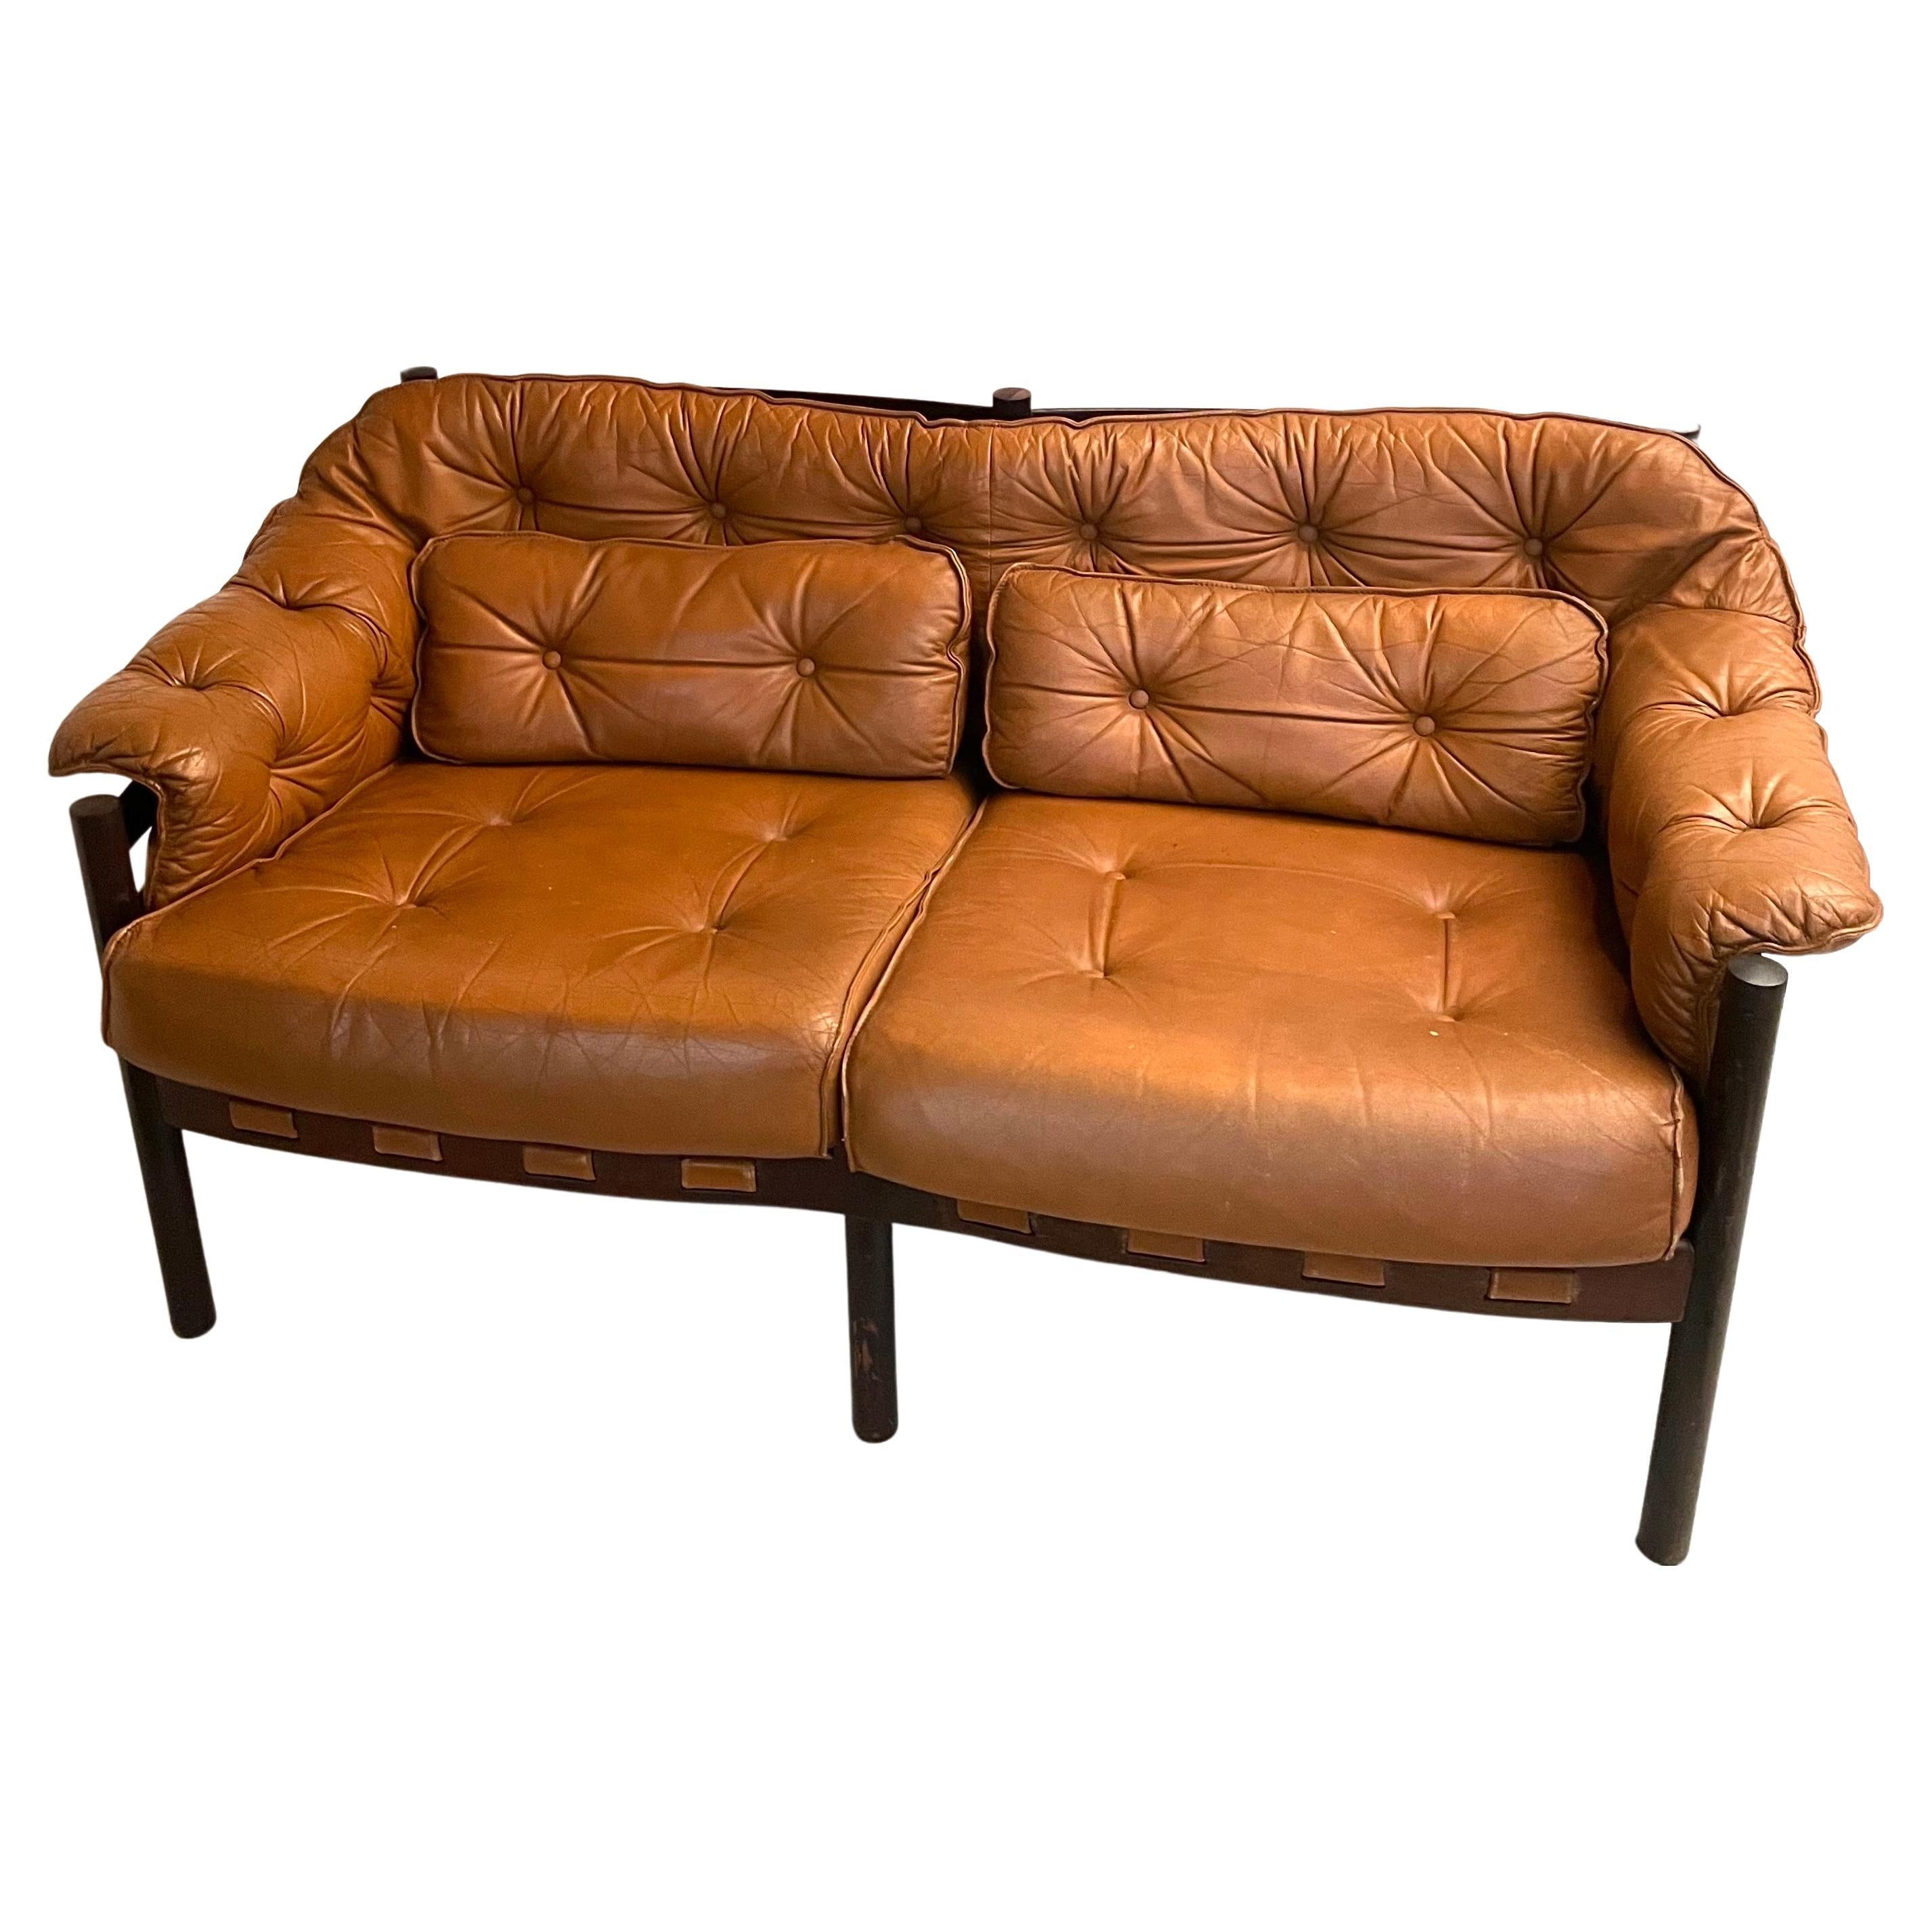 Sven Ellekaer for Coja Two-Seat Settee Sofa in soft Camel Leather For Sale